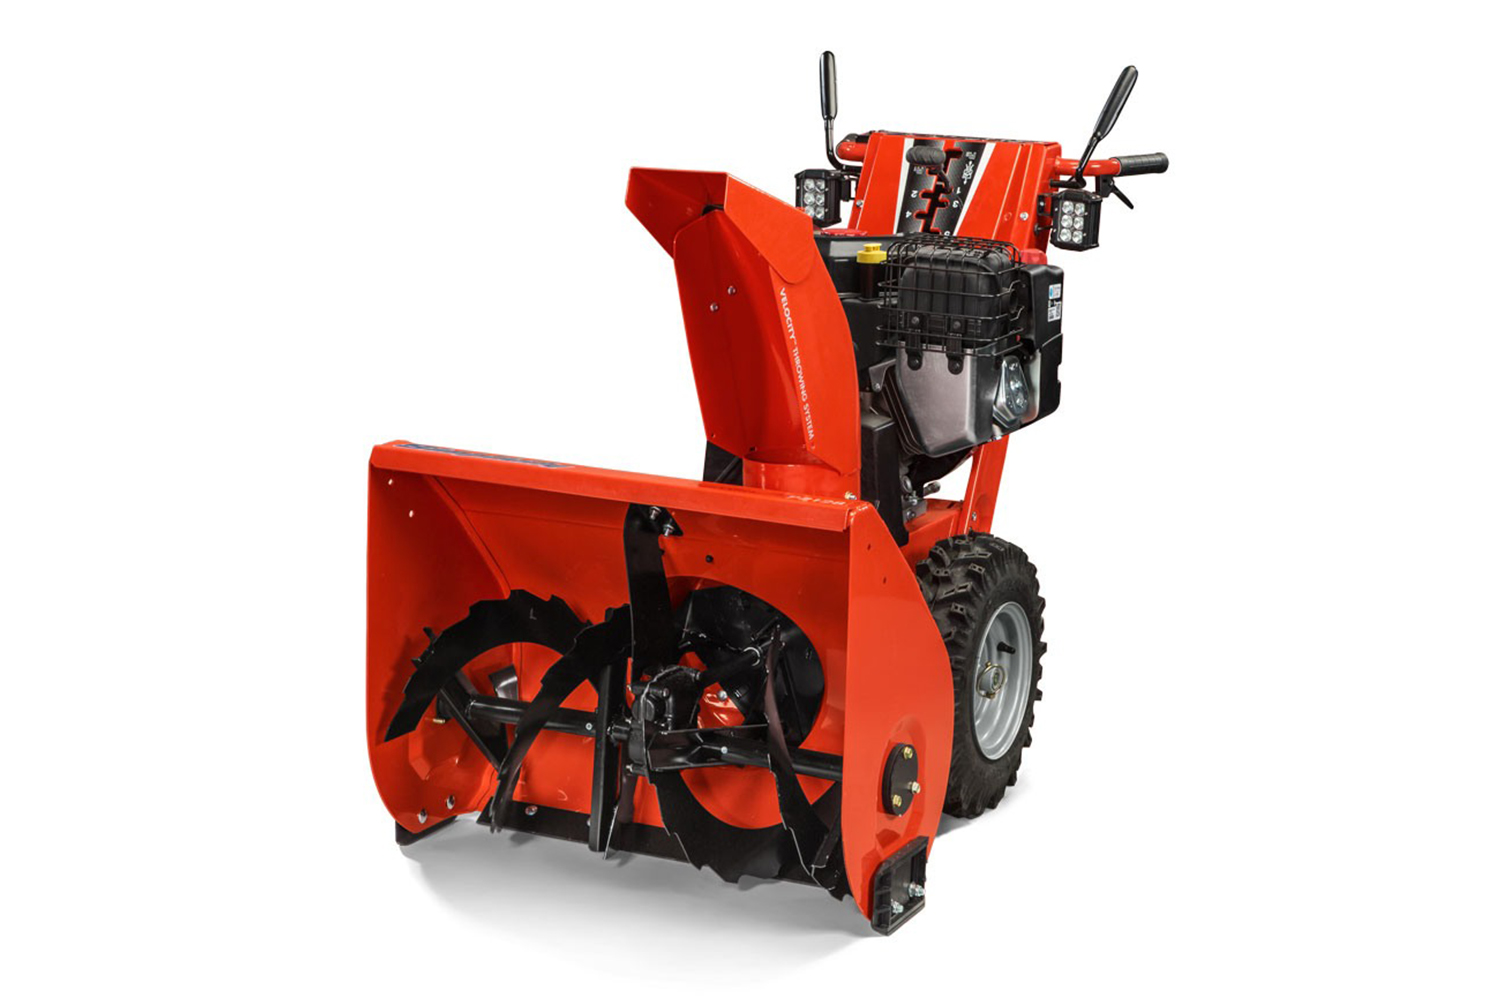 SIMPLICITY SIGNATURE PRO SERIES DUAL-STAGE SNOW BLOWER P1724<br/>*Model shown in image may vary.